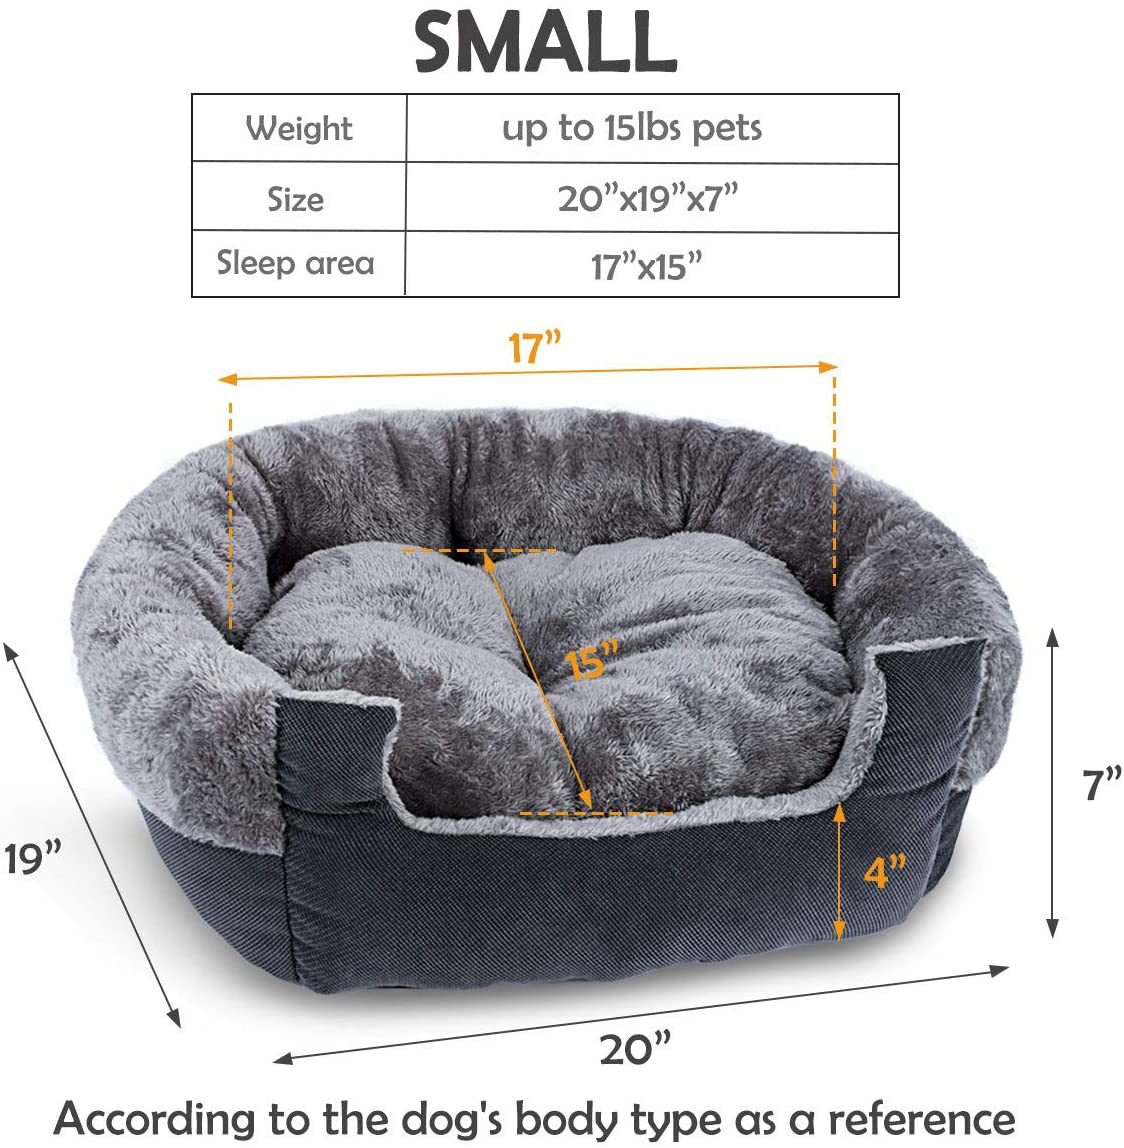 GASUR Dog Beds for Small Dogs & Cat Beds for Indoor Cats, Detachable Machine Washable Soft & Plush Calming Dog Bed, round Pet Beds for Indoor Cats, Warming & Cooling Kitten Puppy Bed